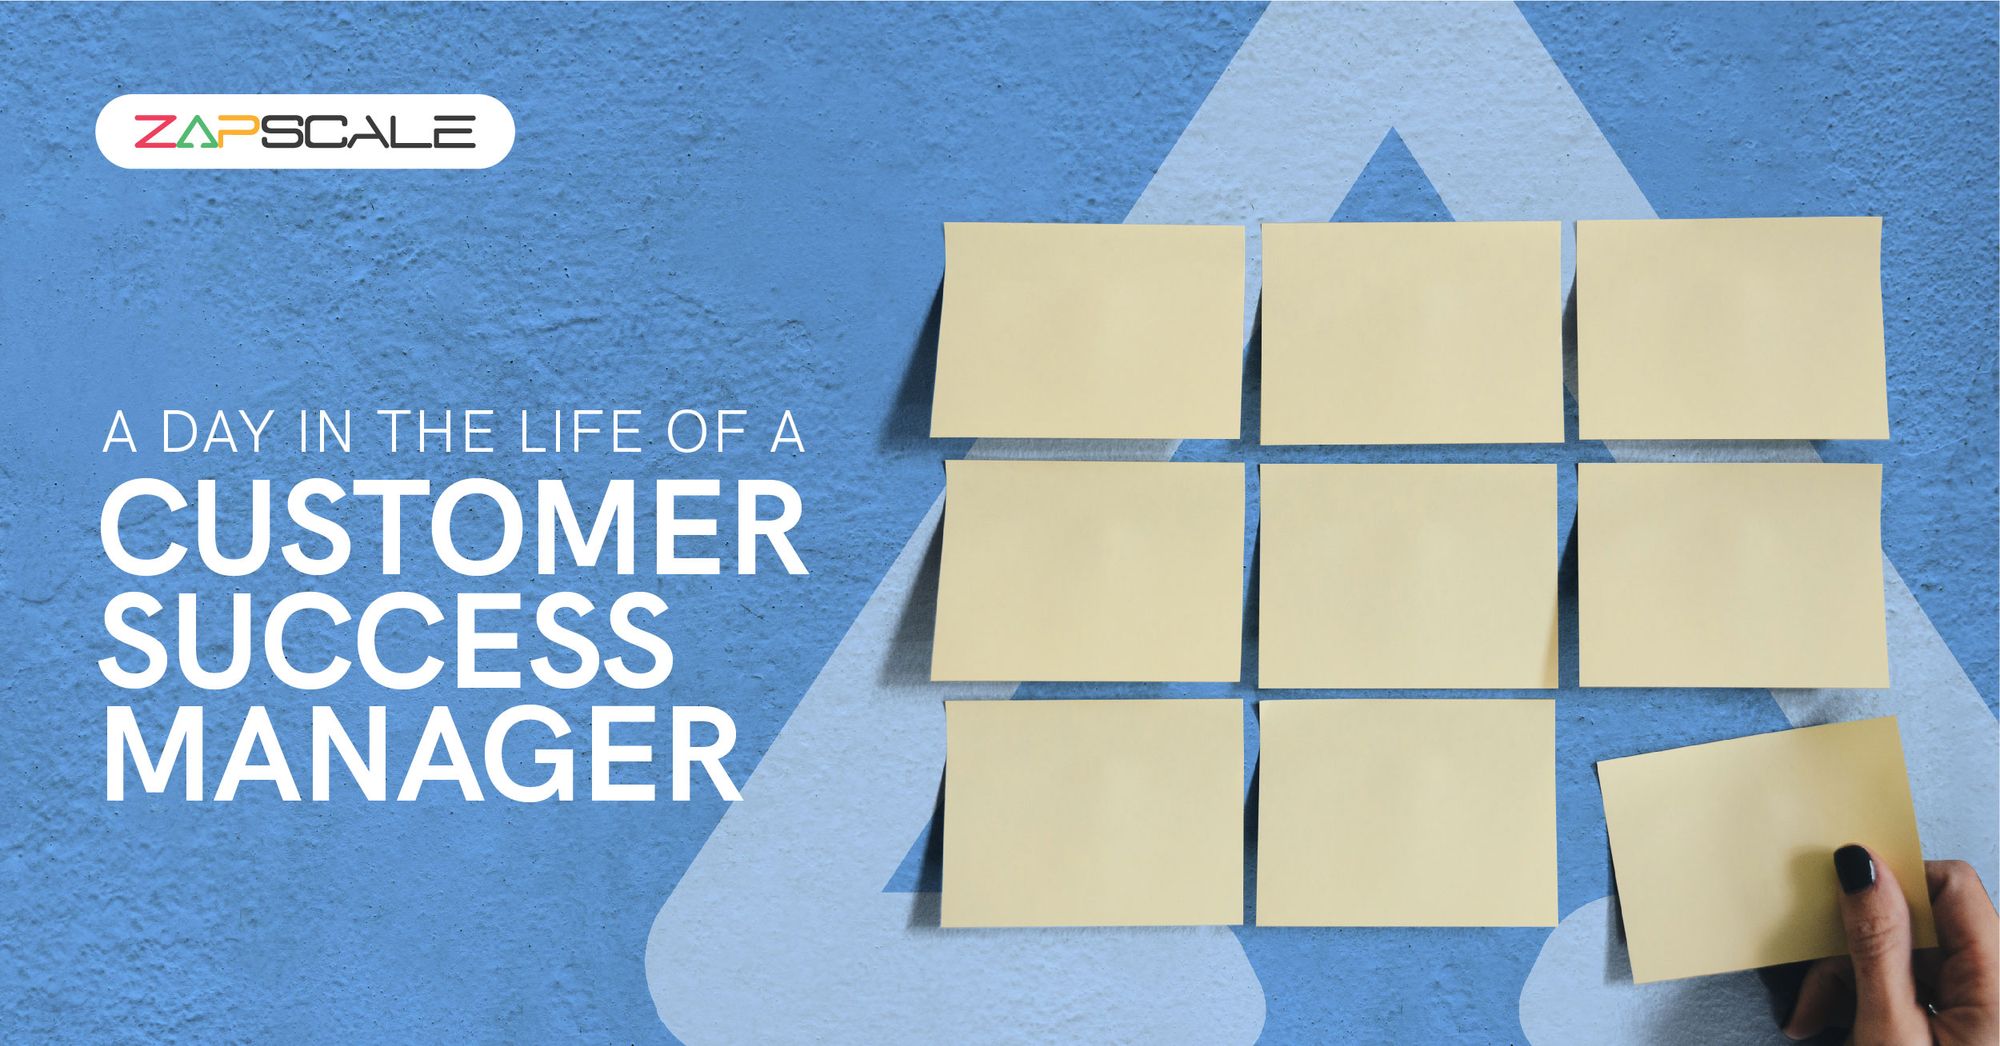 A day in the life of a Customer Success Manager